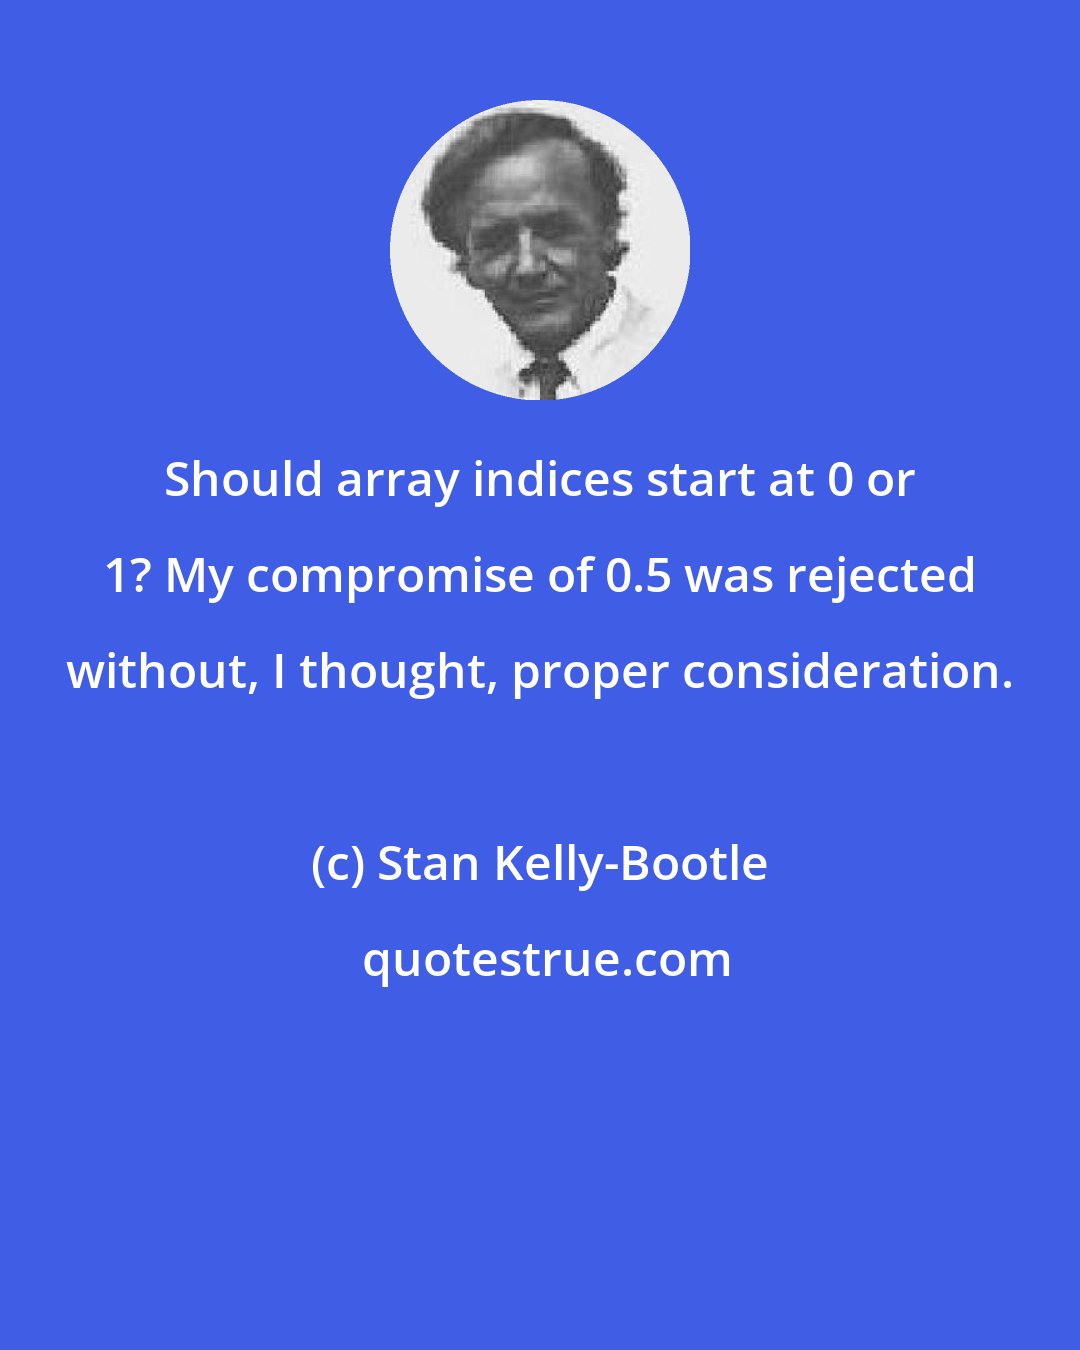 Stan Kelly-Bootle: Should array indices start at 0 or 1? My compromise of 0.5 was rejected without, I thought, proper consideration.